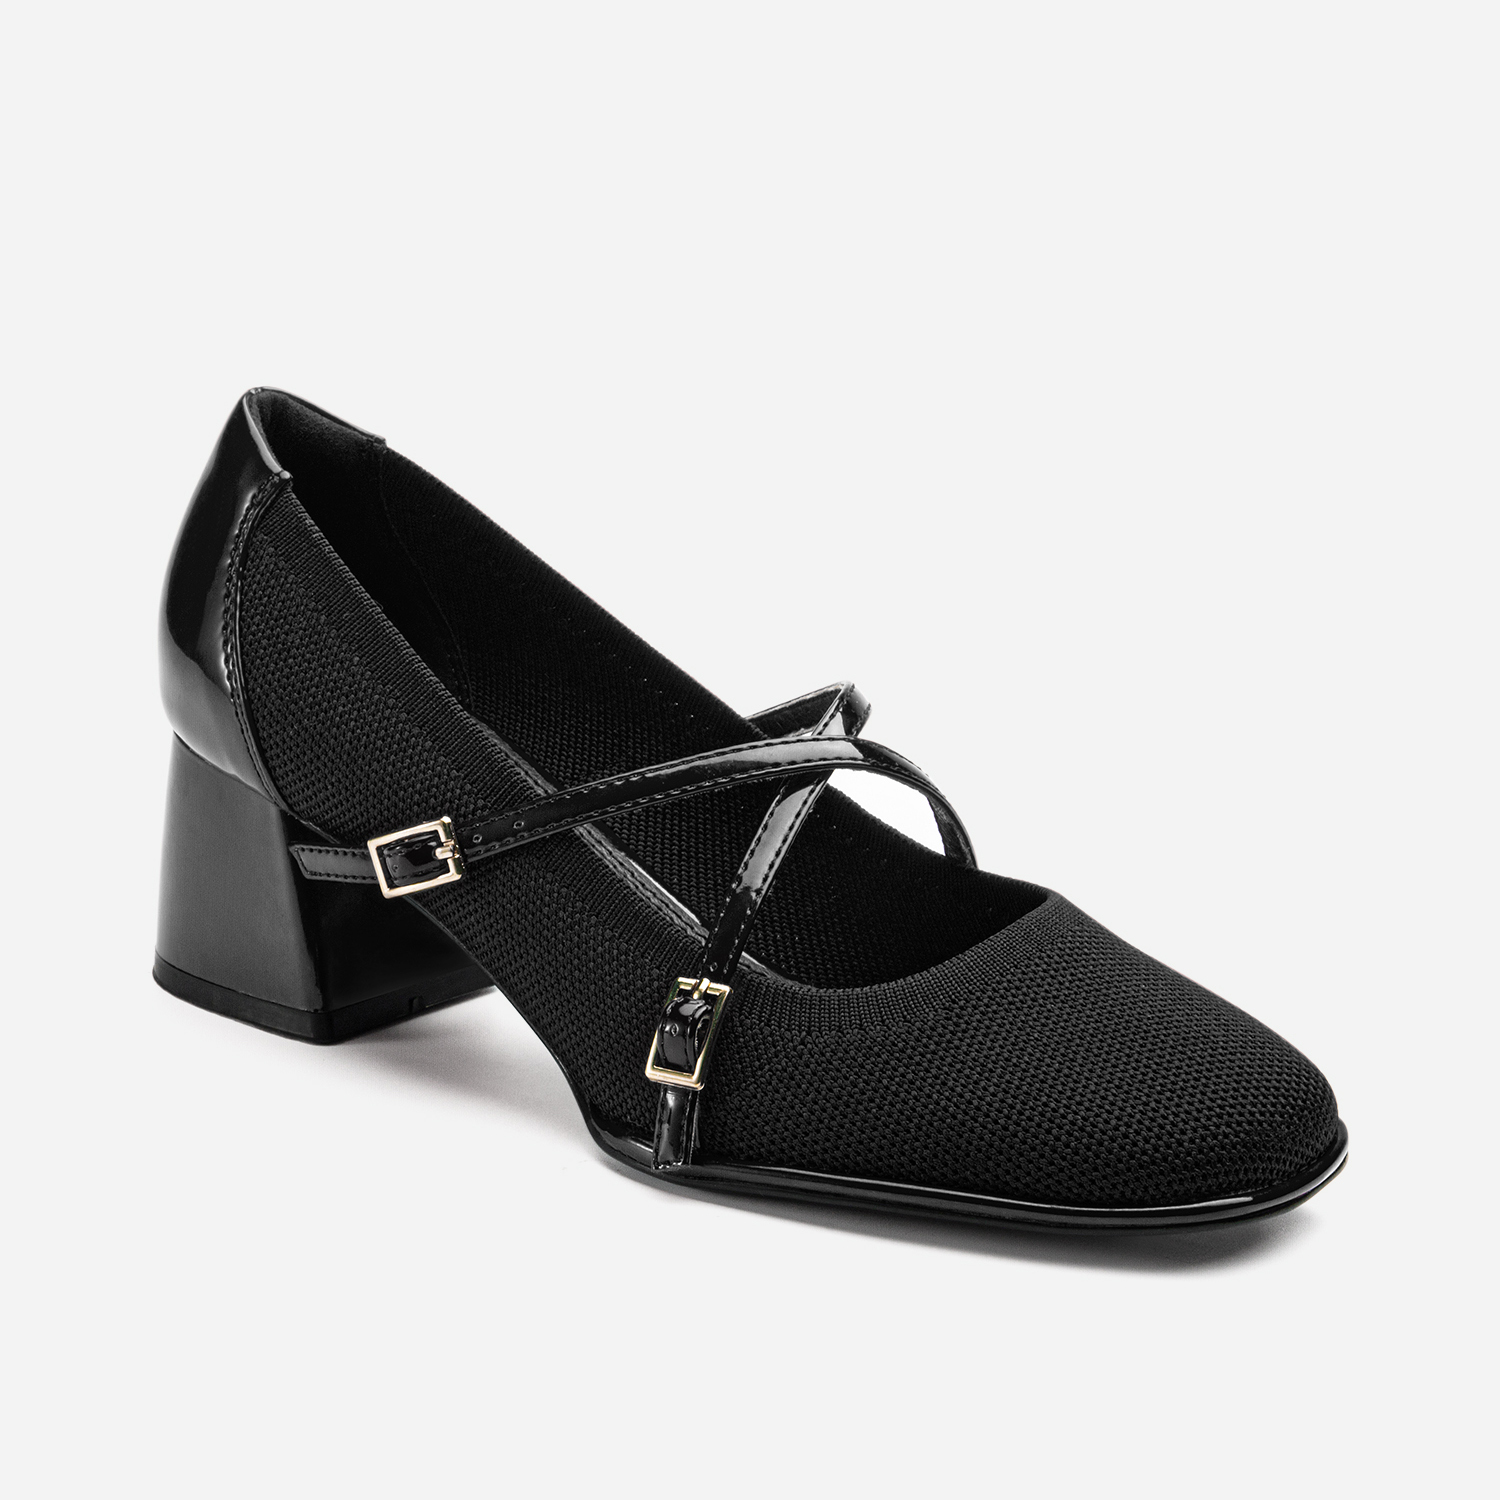 MOUSSE FIT Commute Square Toe Heeled Mary Janes